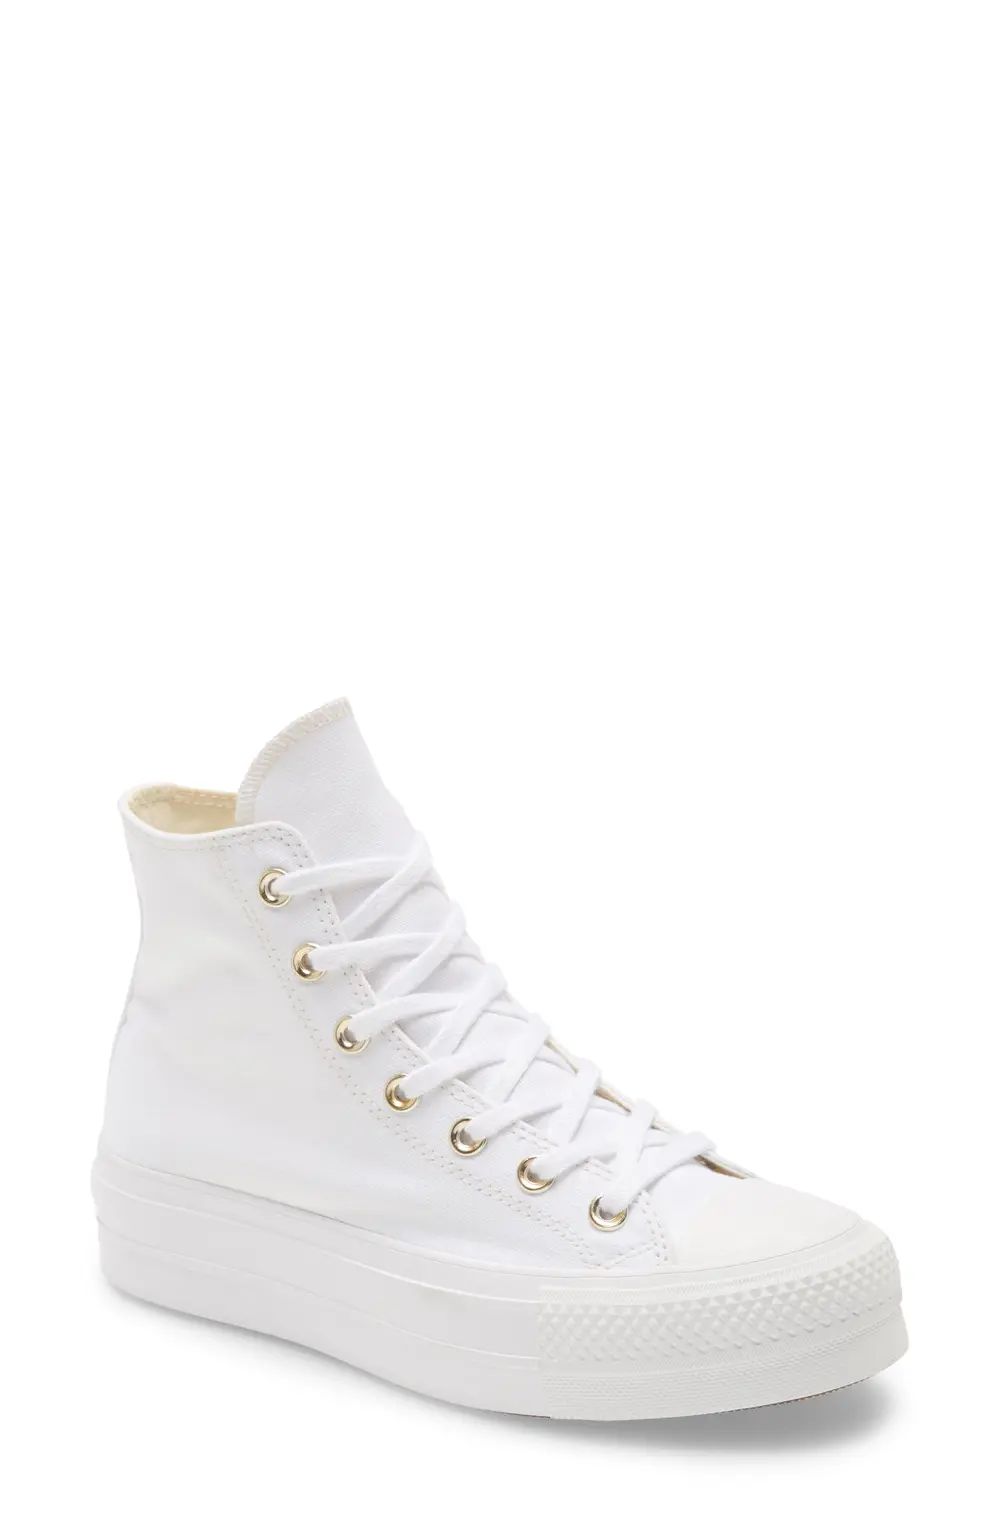 Converse Chuck Taylor(R) All Star(R) Lift High Top Platform Sneaker, Size 8 in White/White/Gold at N | Nordstrom Canada